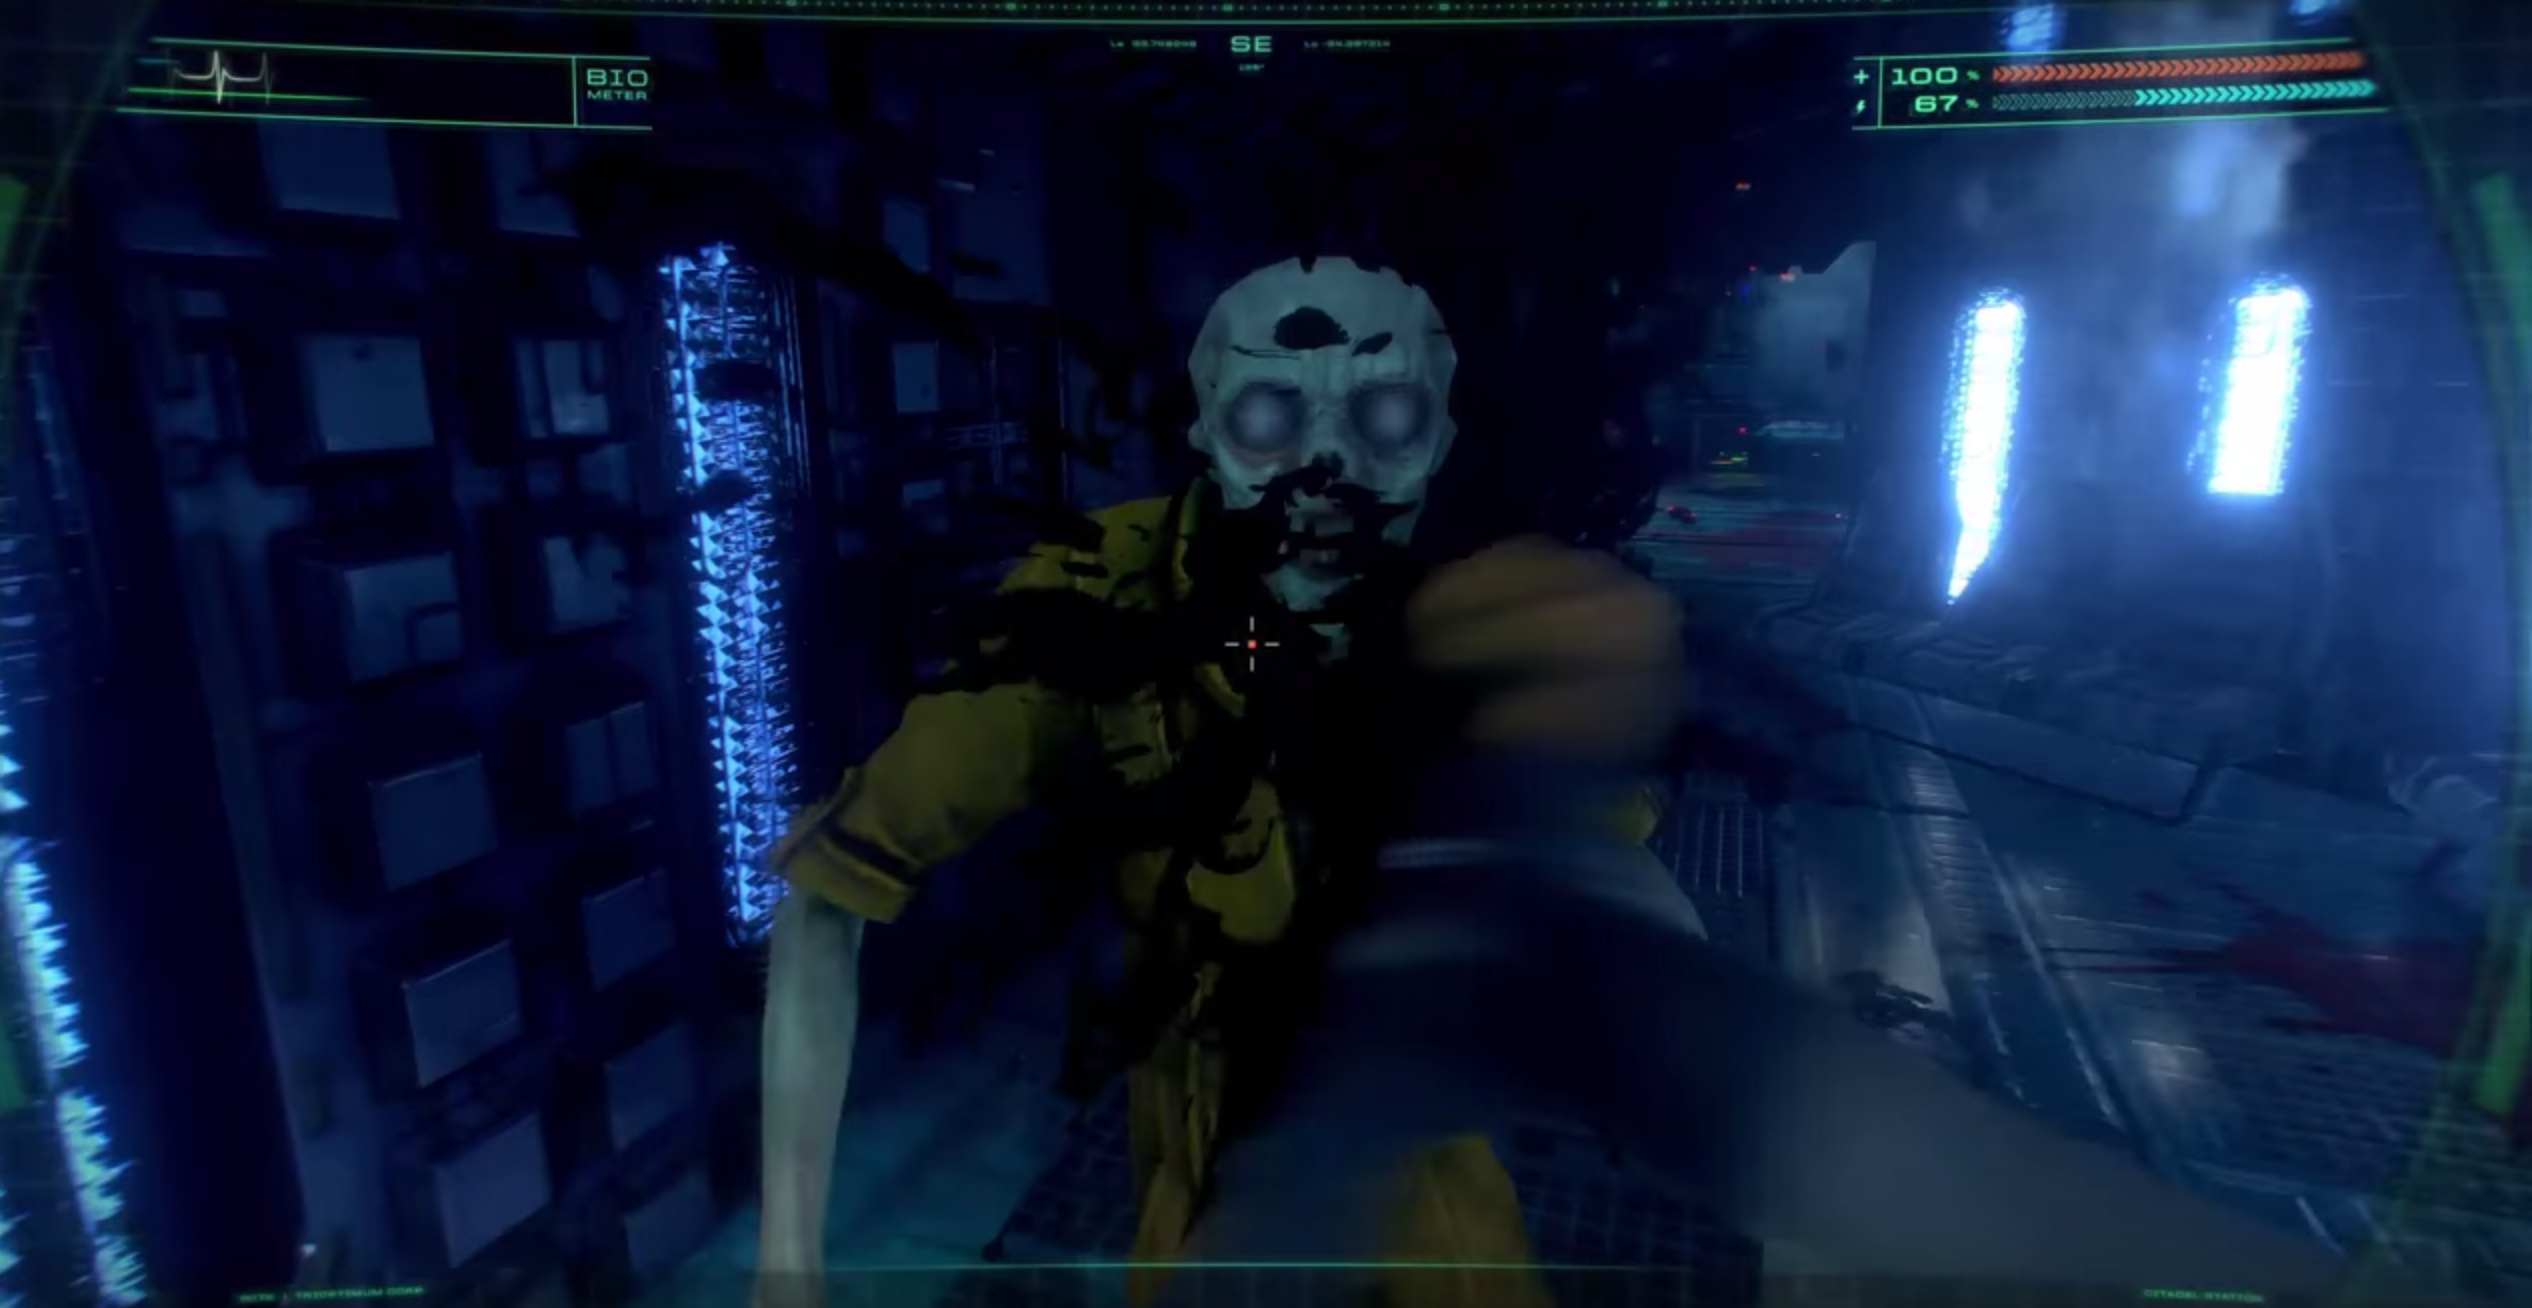 system shock remastered release date